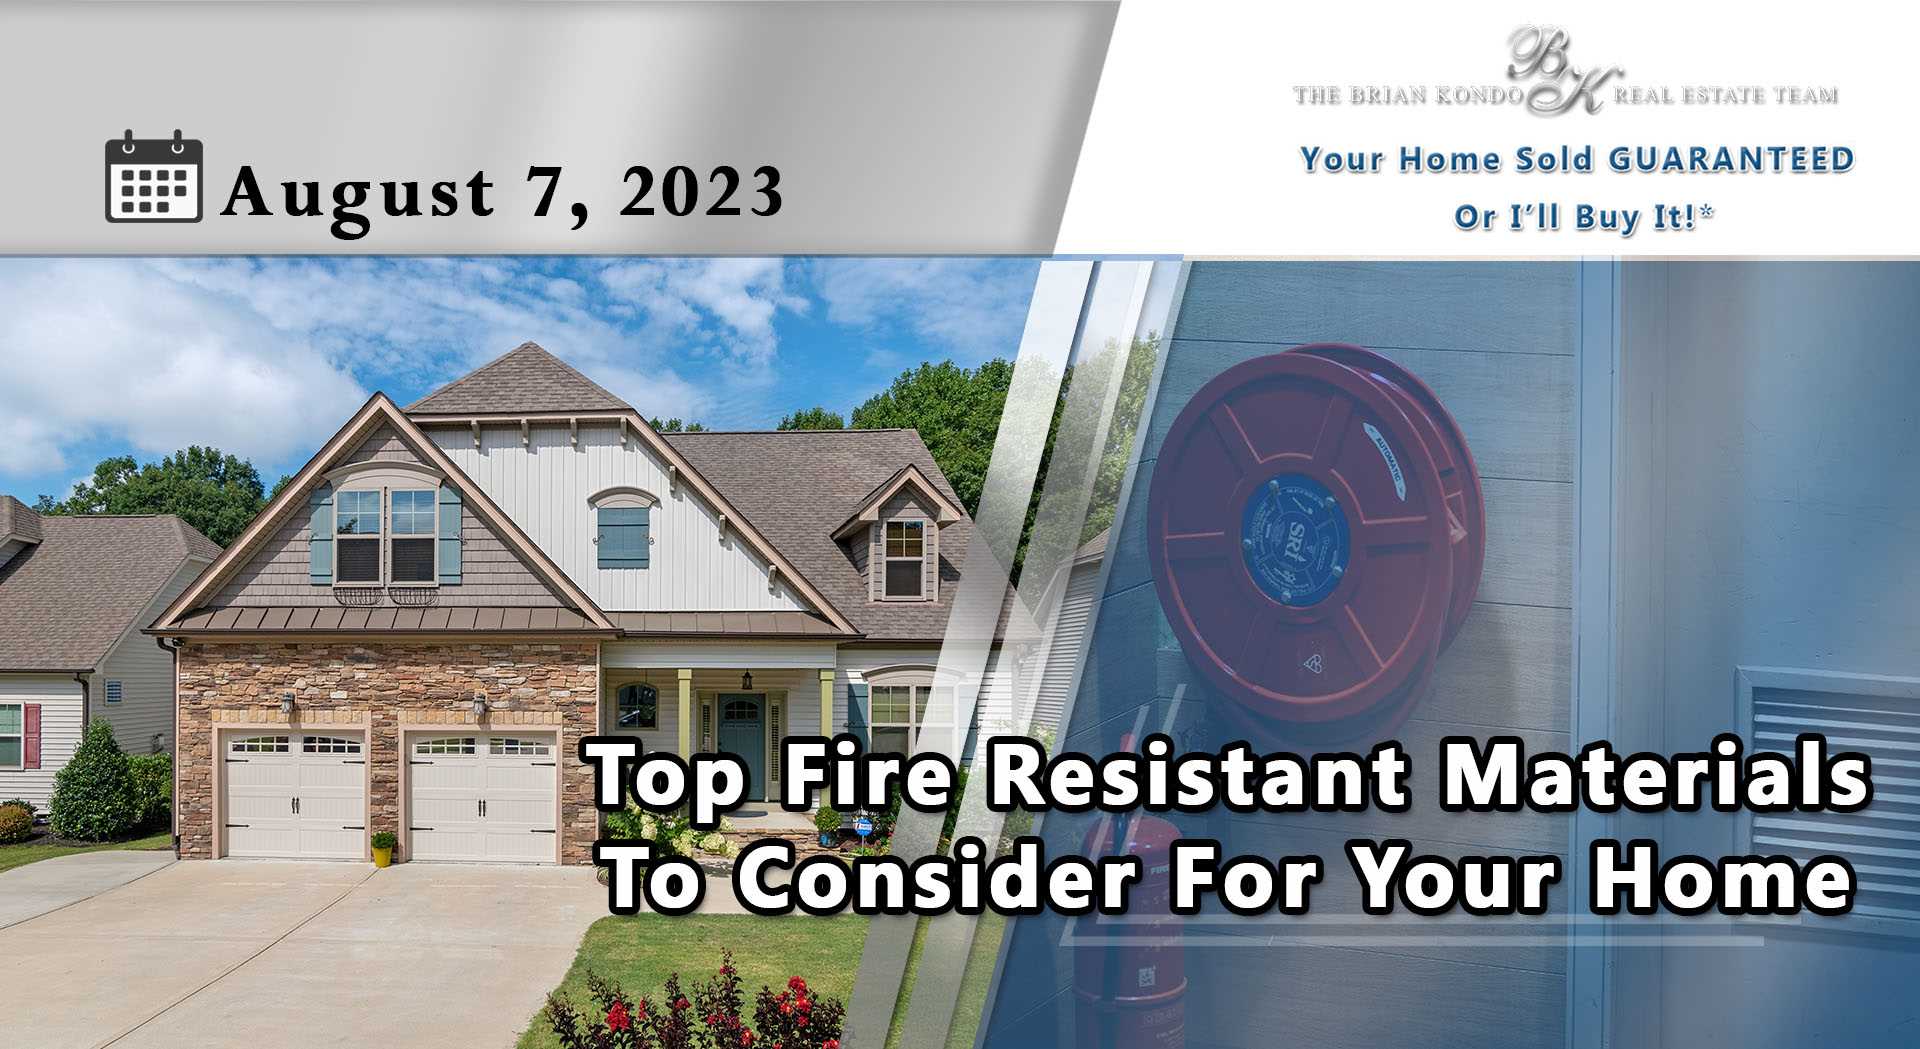 Top Fire Resistant Materials To Consider For Your Home